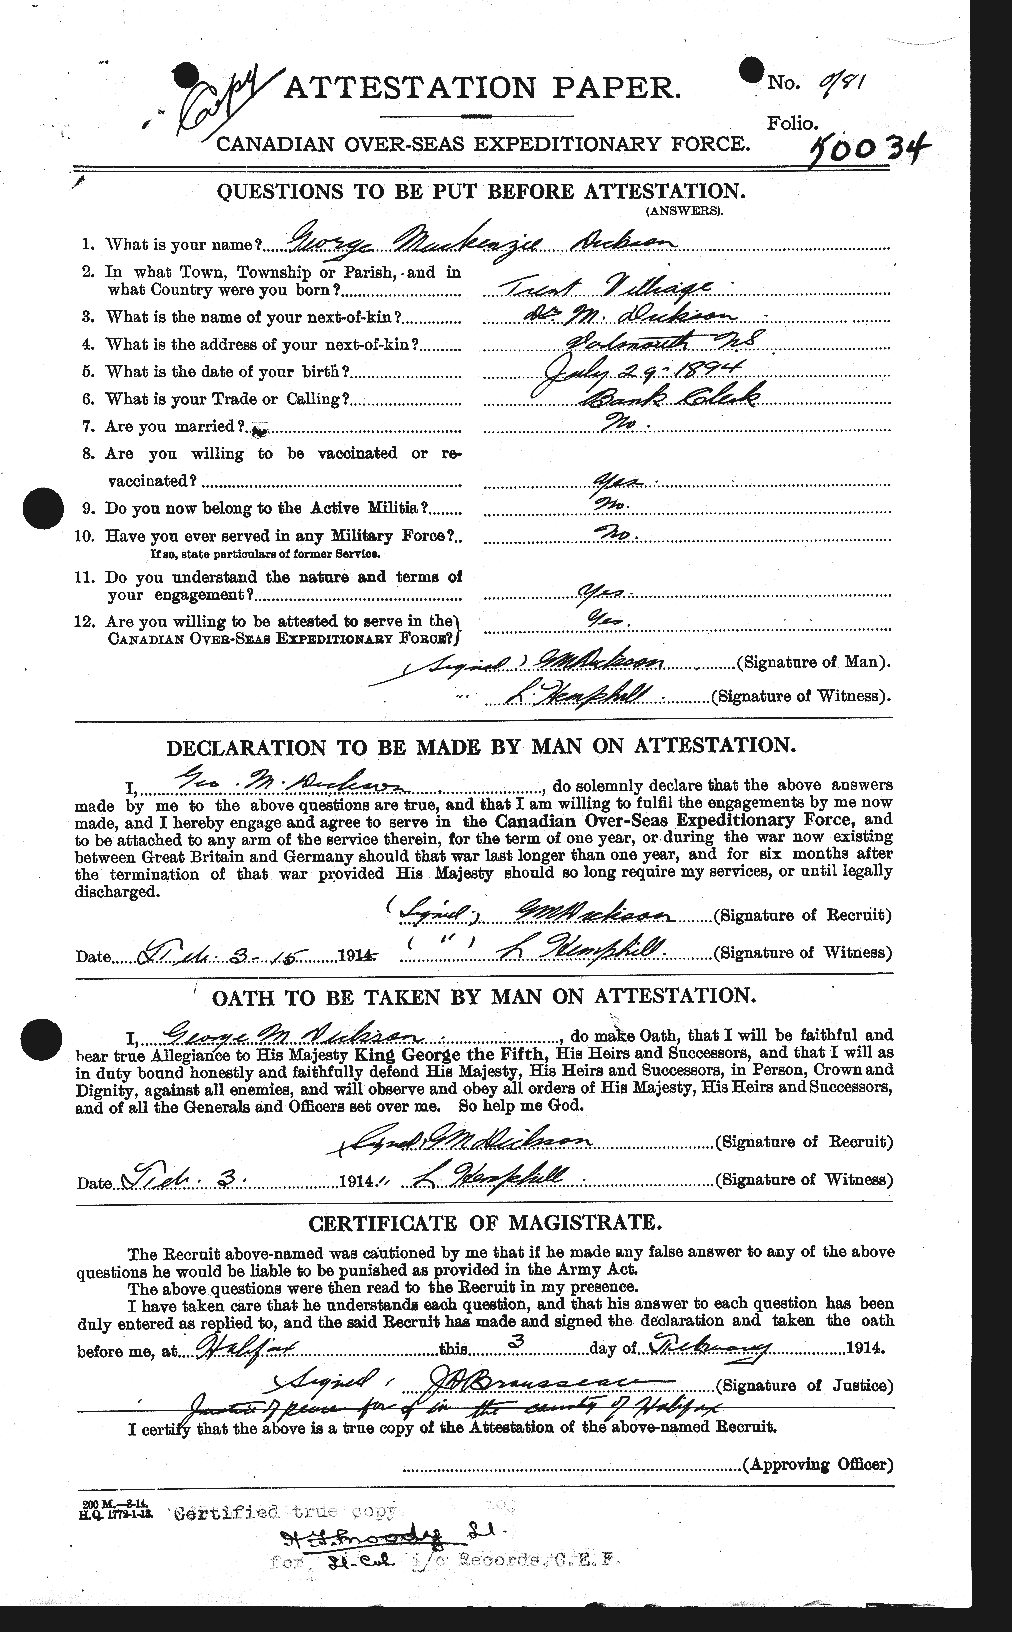 Personnel Records of the First World War - CEF 293500a